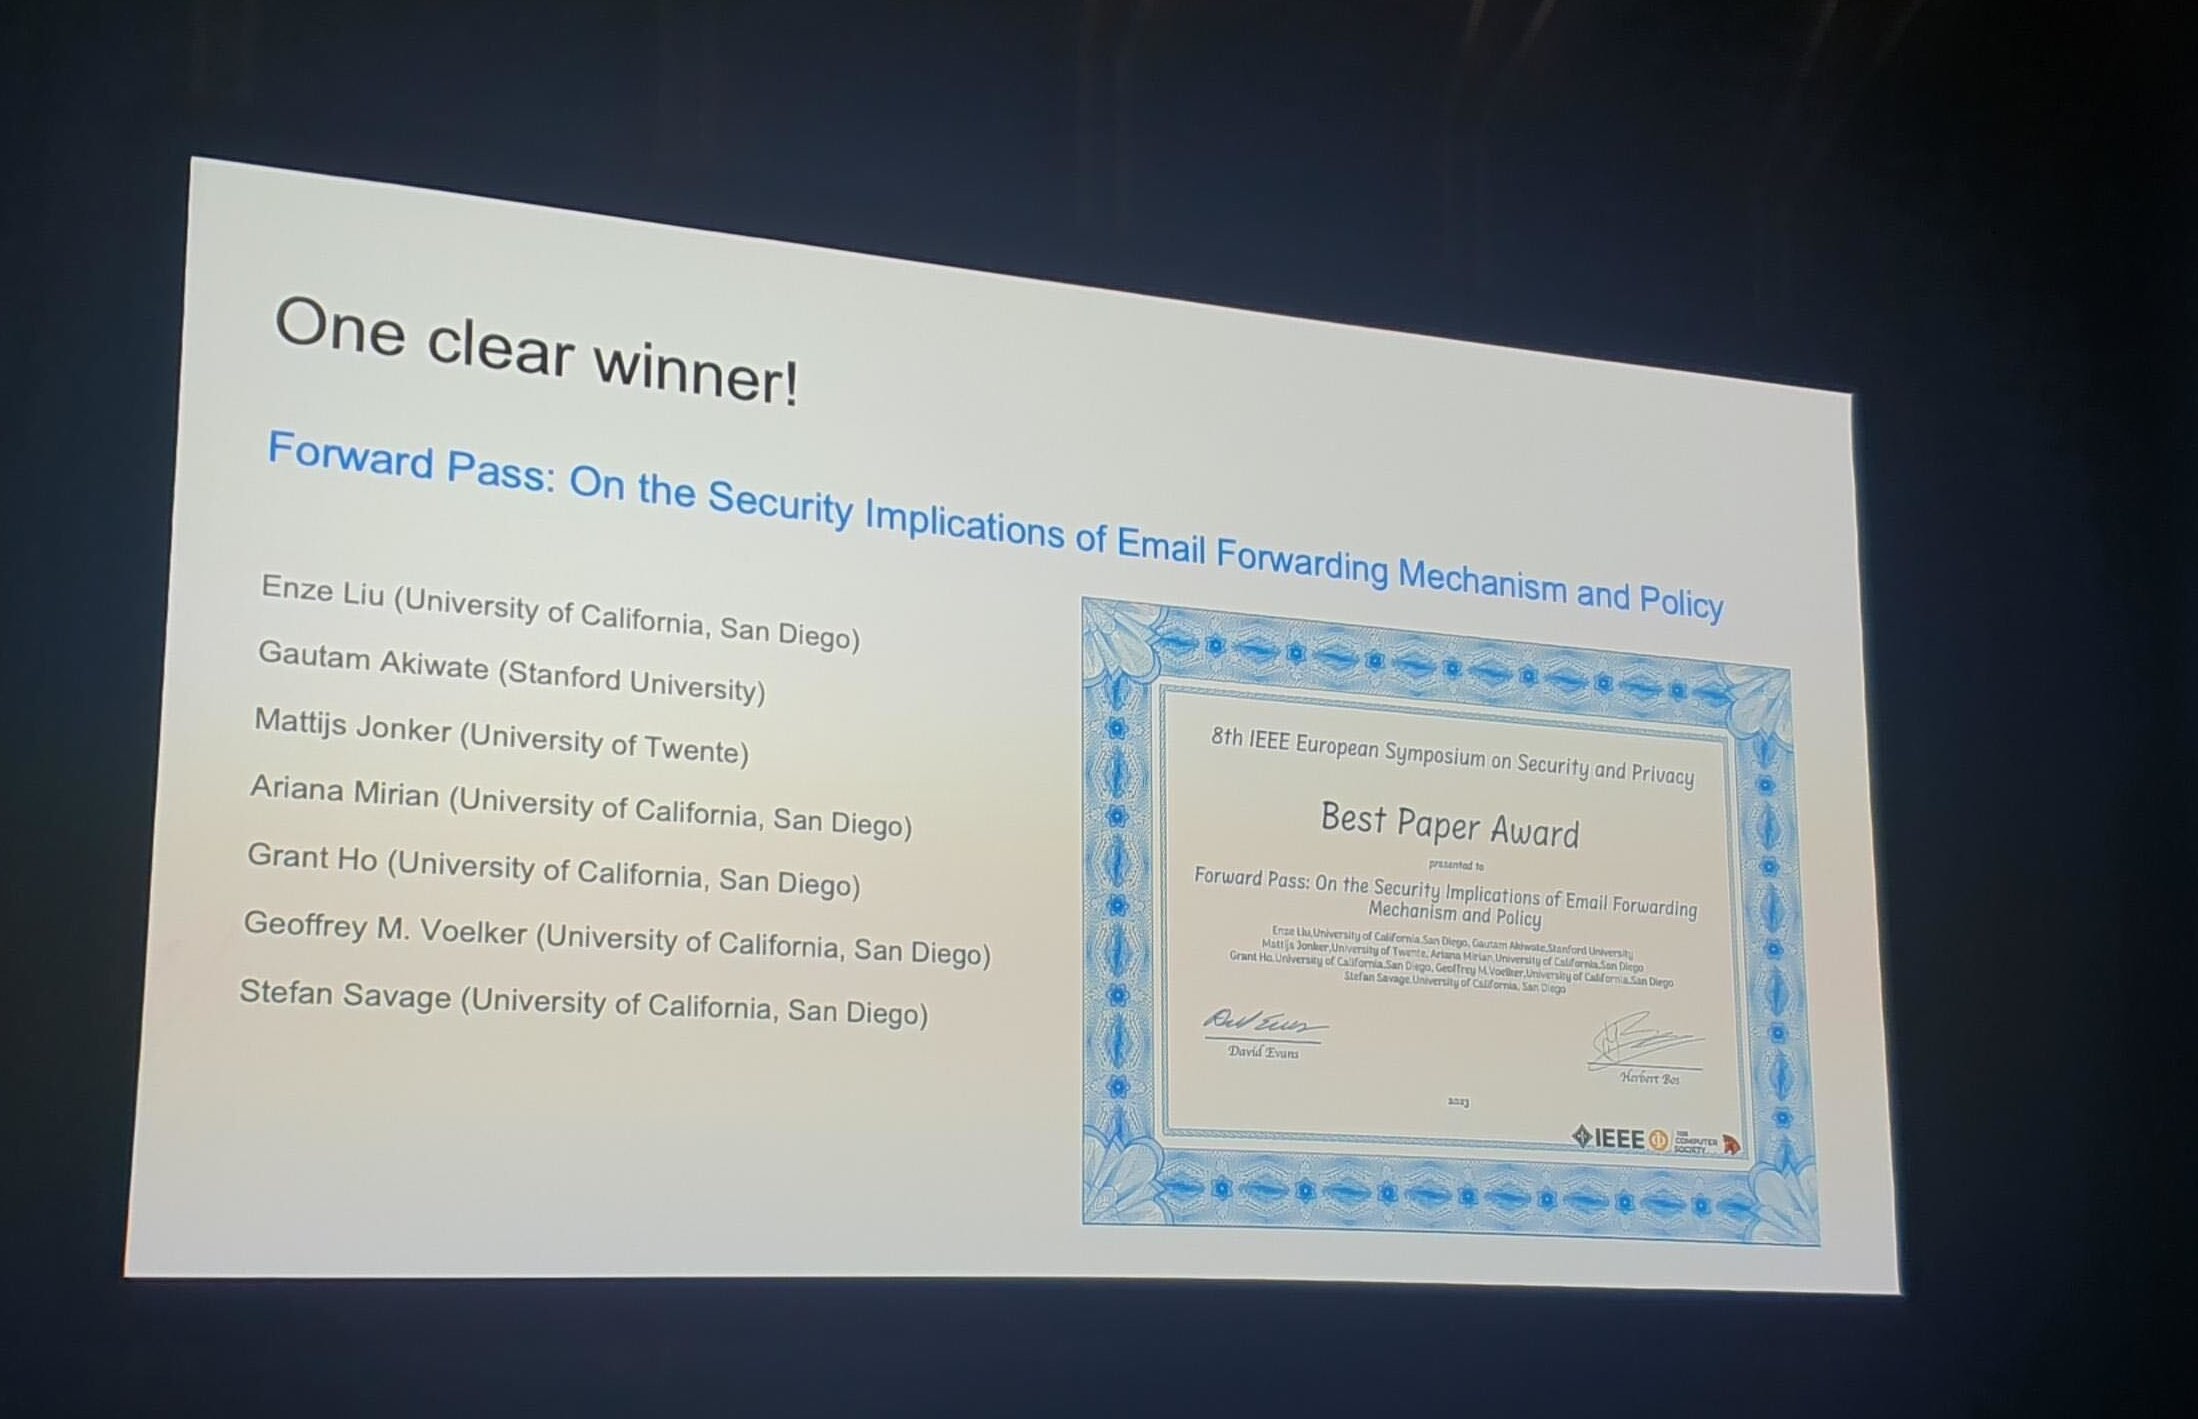 Euro Security and Privacy award for 